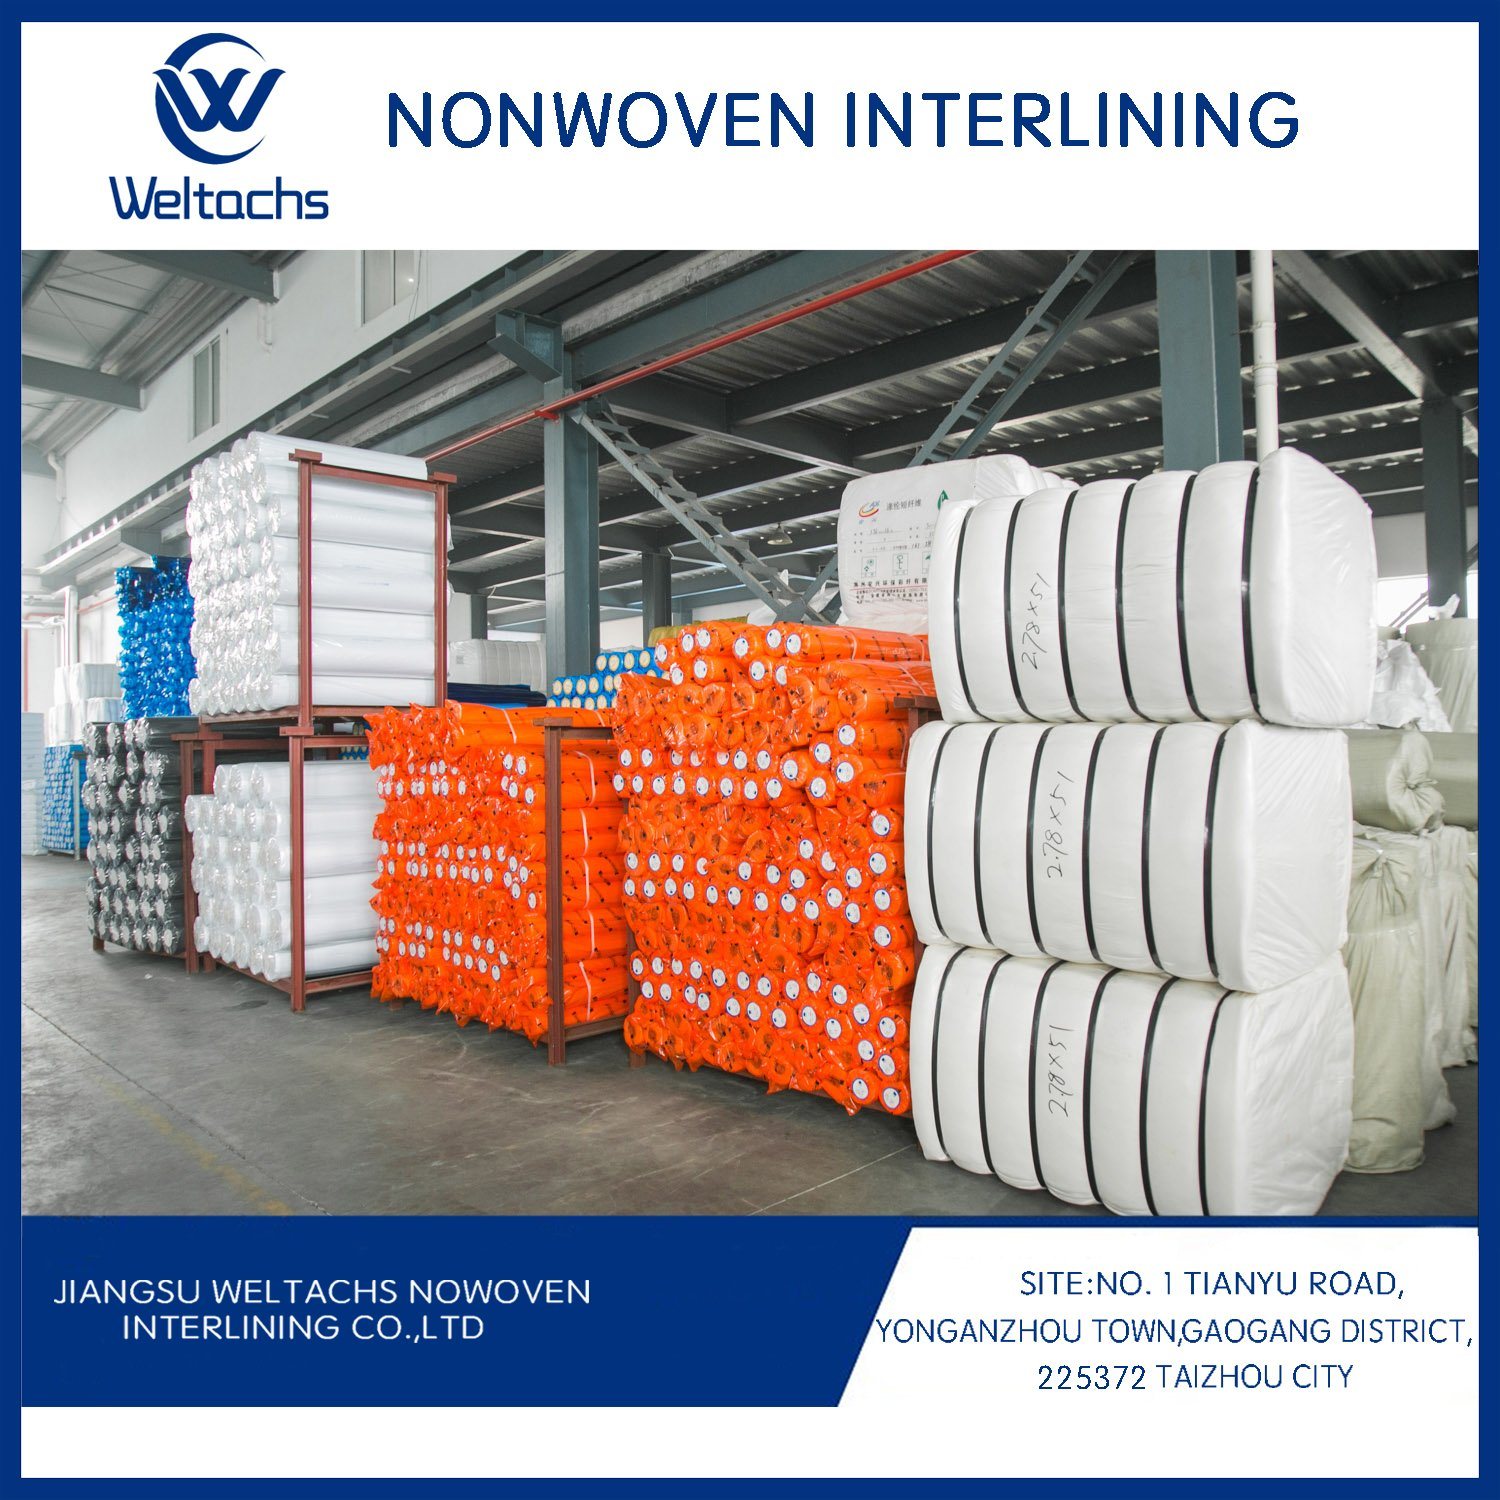 Chemical Bond 100% Polyester Non-Fusing Nonwoven Interlining 1060hb